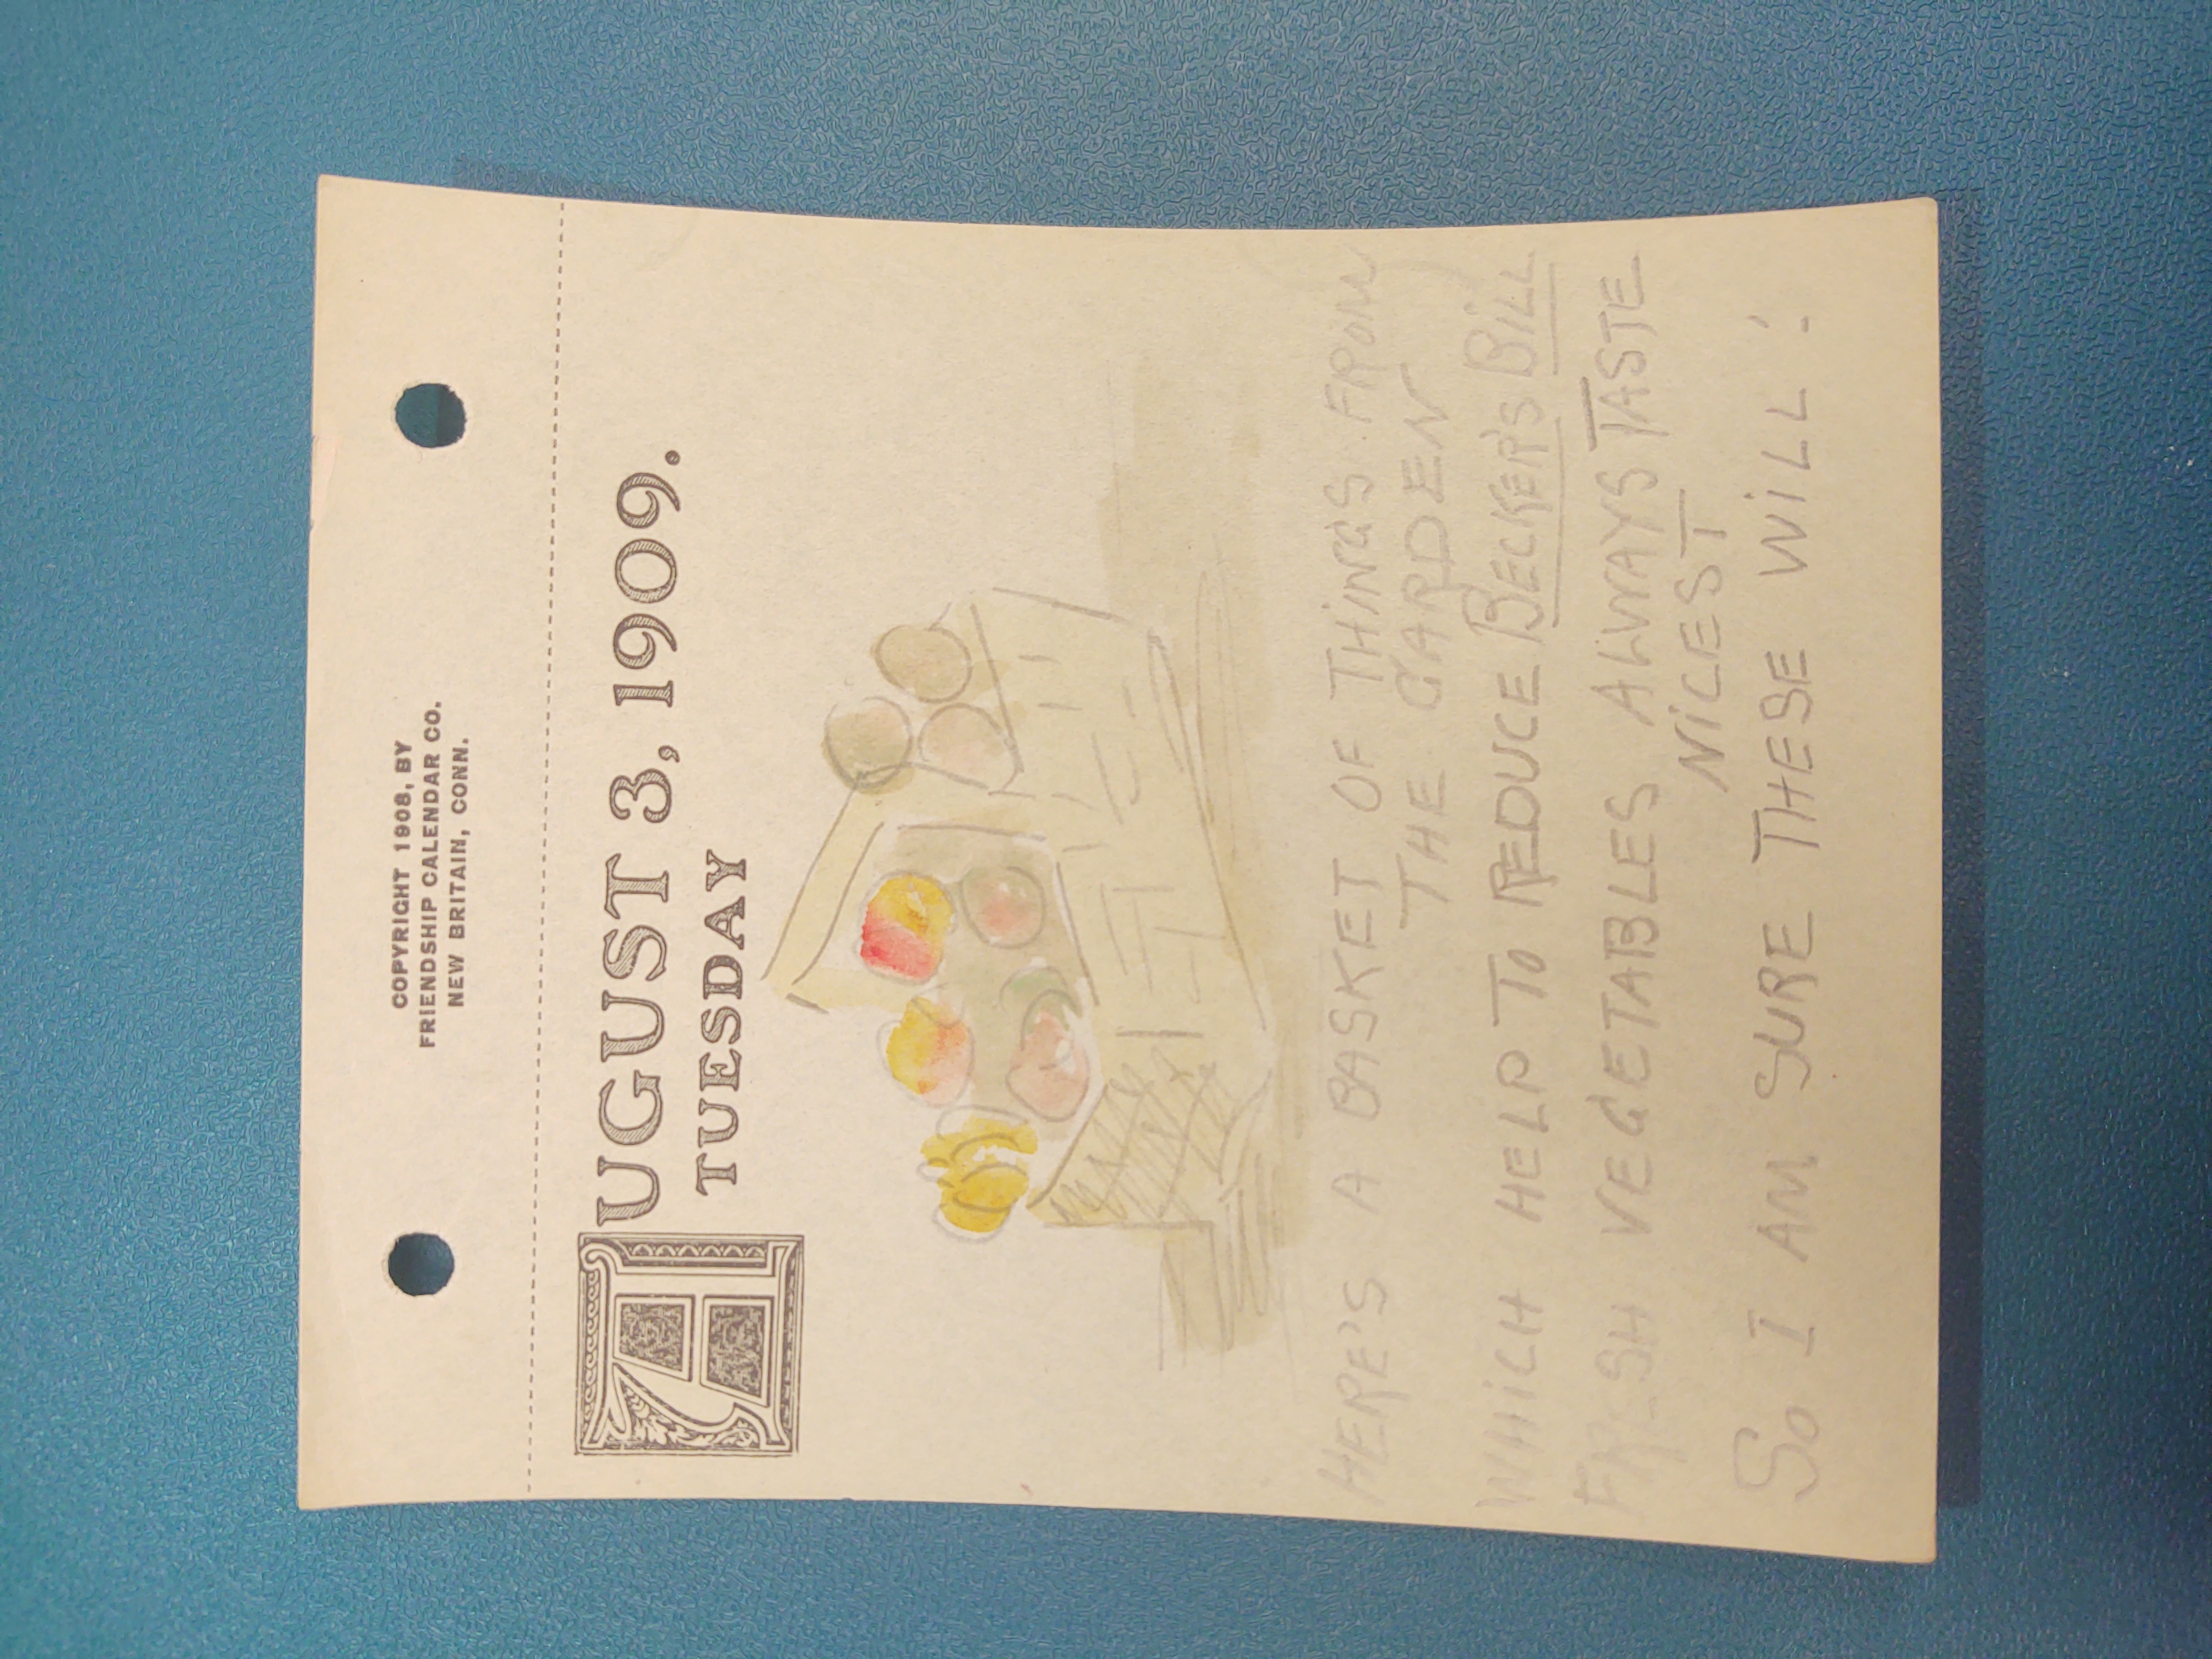 August 3, 1909. Tuesday: A basket of fruits and vegetables is drawn using pencil and watercolor. The pencil is faded, but surprisingly legible.